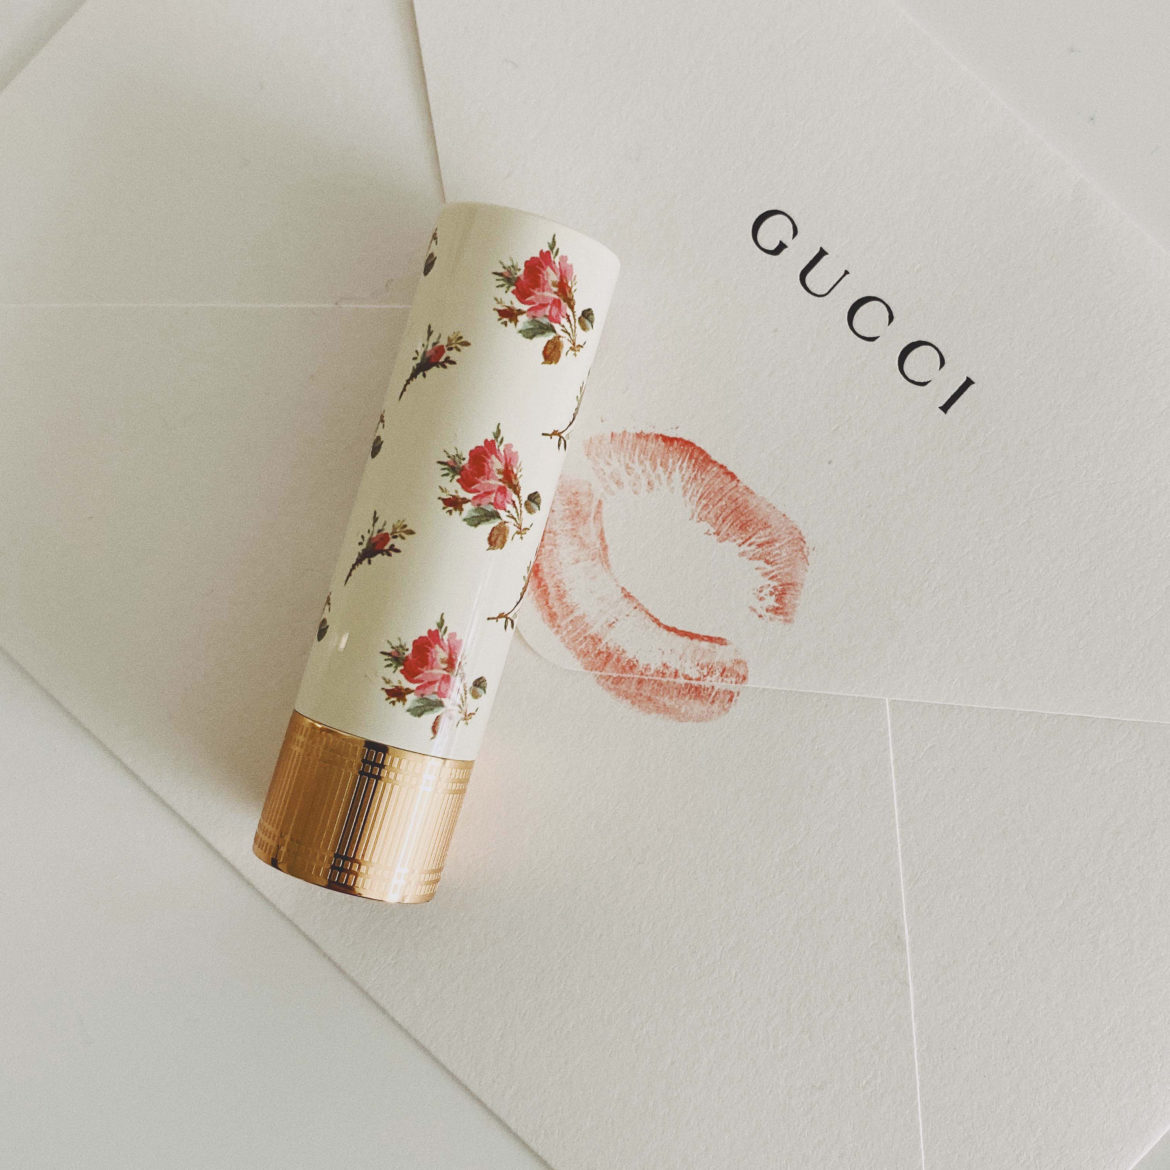 Holiday gift guide for women 2019 – Affordable luxury gift ideas - Gucci lipstick